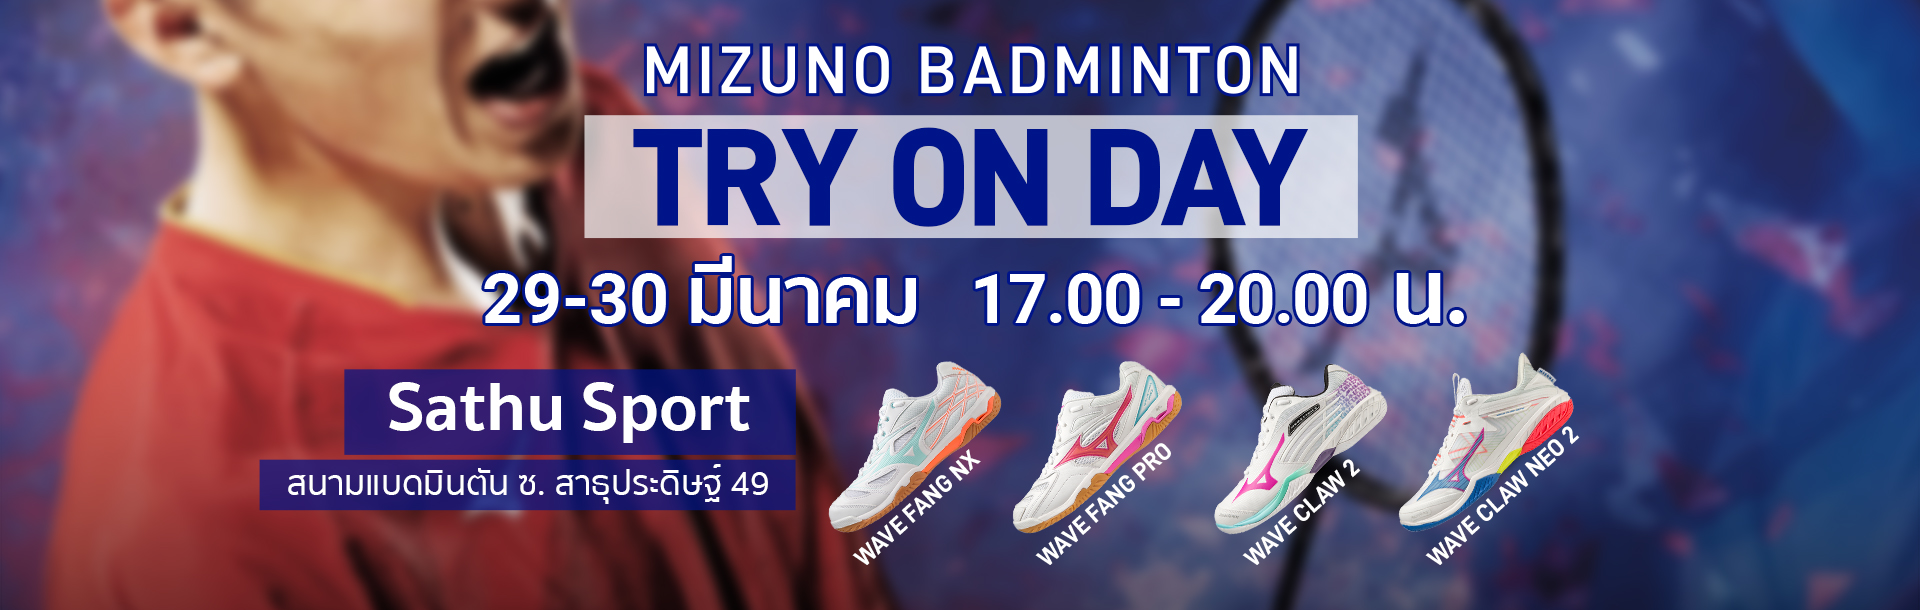 BADMINTON TRY ON DAY